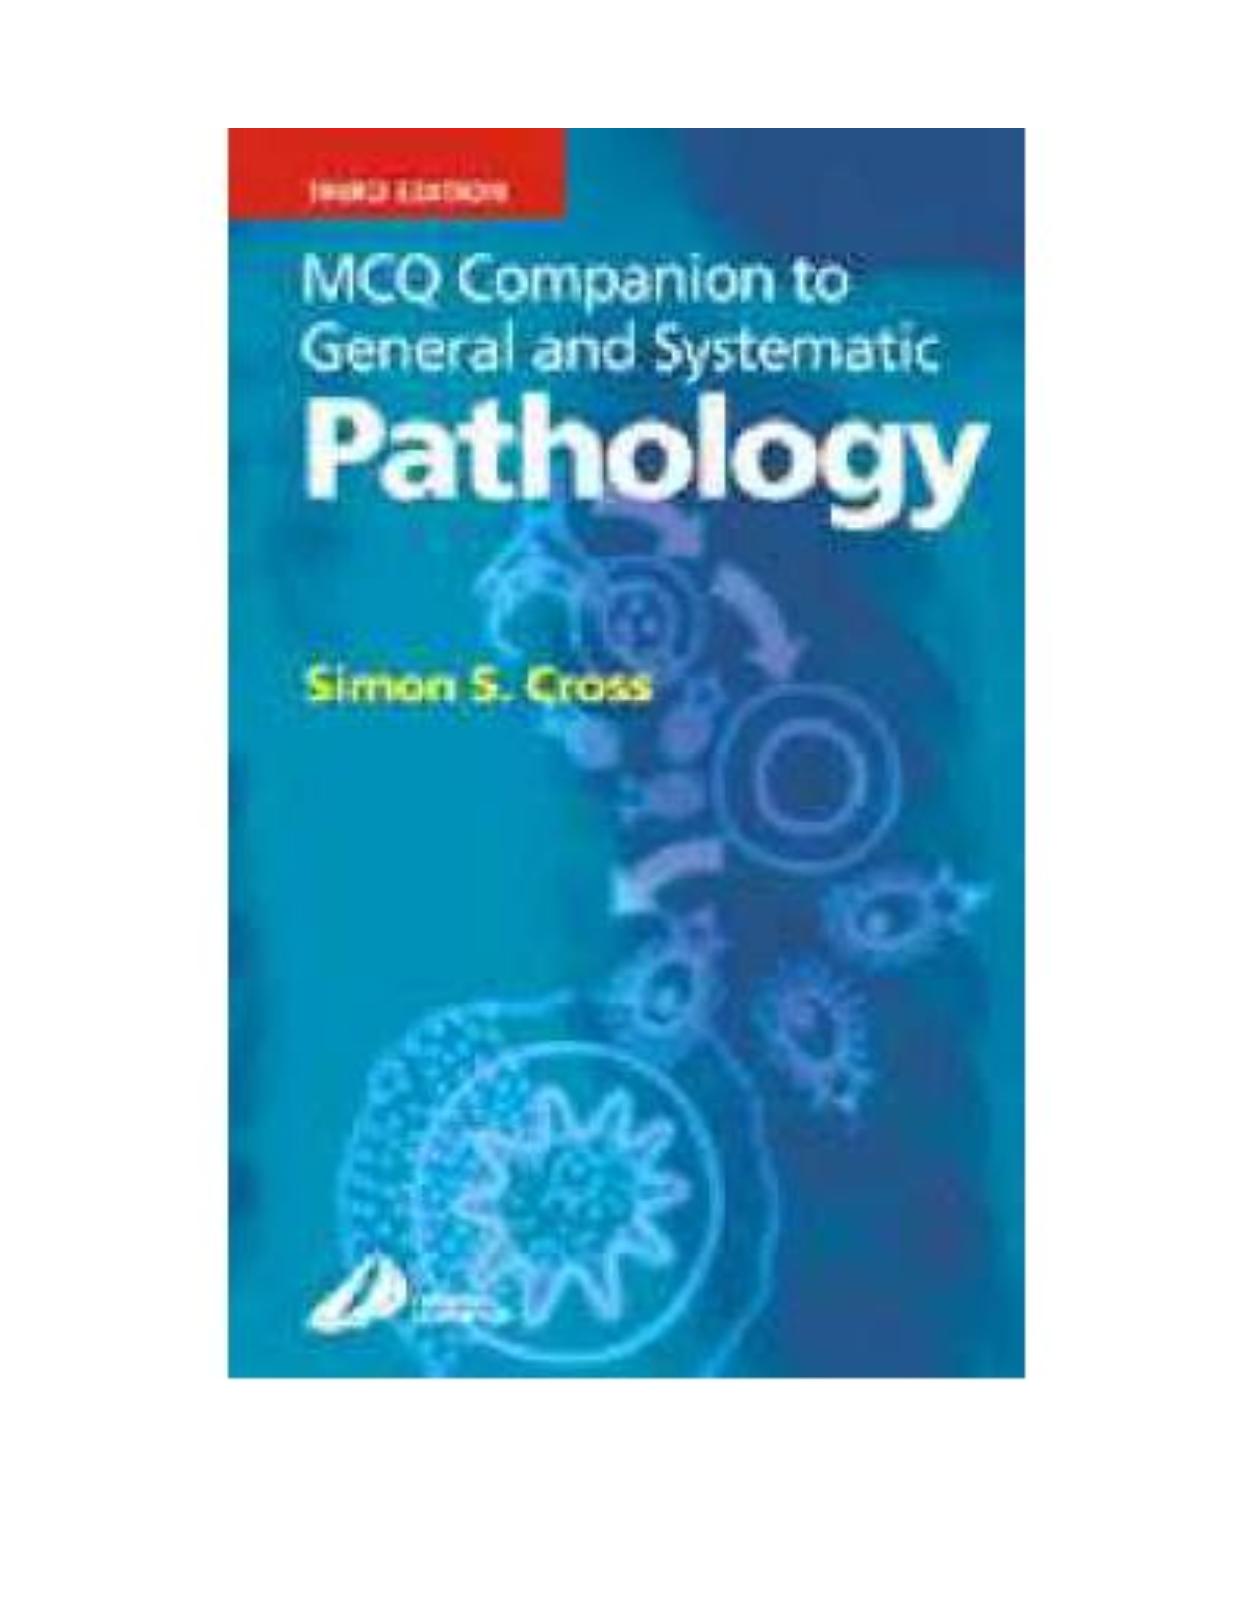 Pathology MCQ Companion to General and Systematic